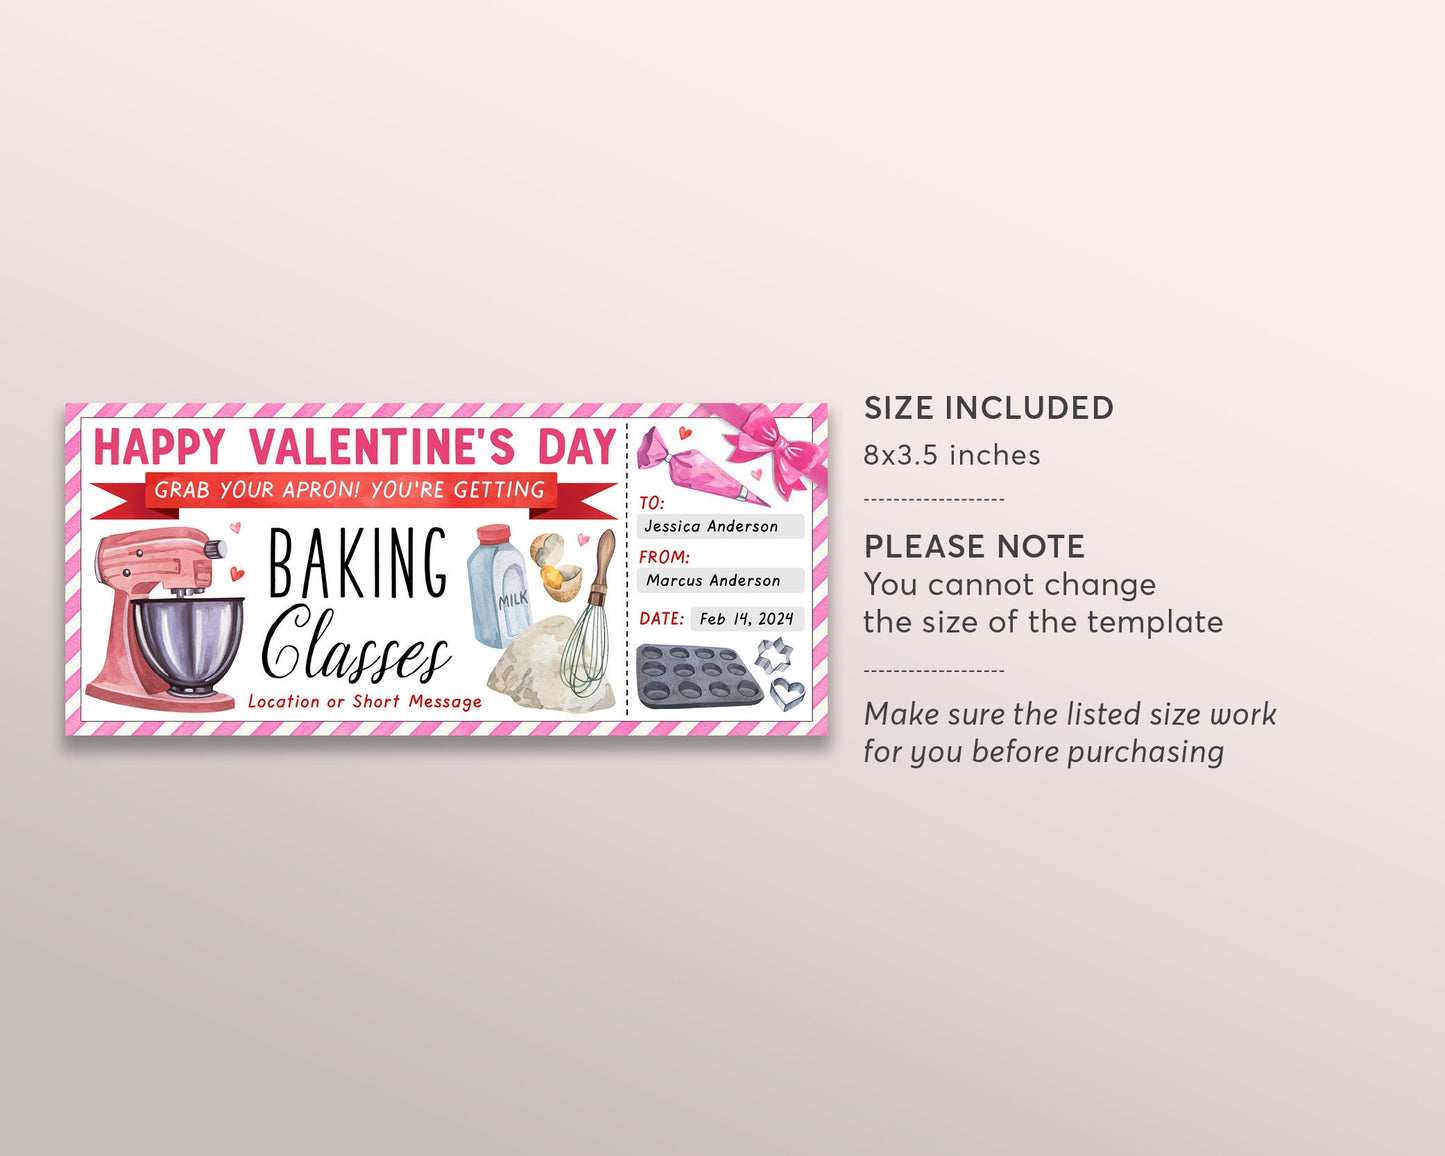 Valentines Day Baking Classes Gift Certificate Ticket Editable Template, Anniversary Surprise Cake Baking Lessons, Cake Decoration Voucher